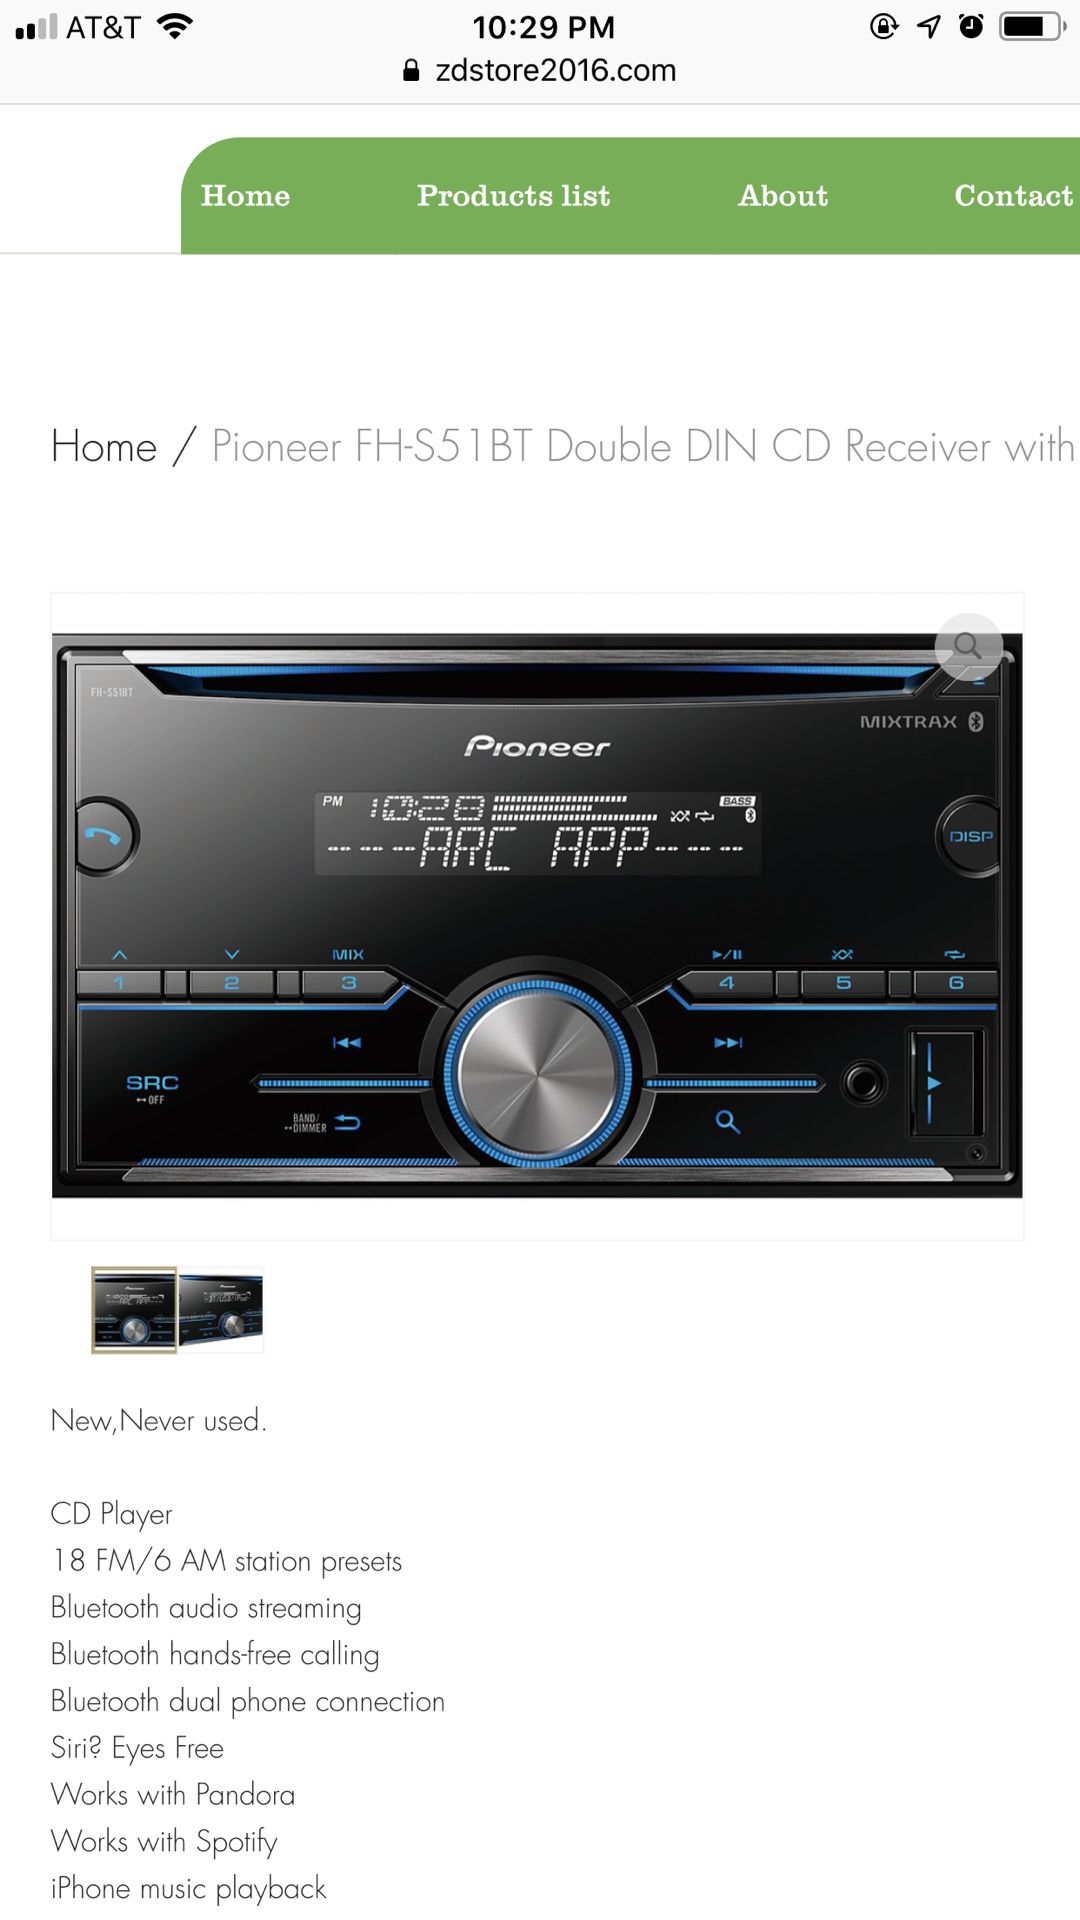 Pioneer FH-S51BT Double DIN CD Receiver with built-in Bluetooth